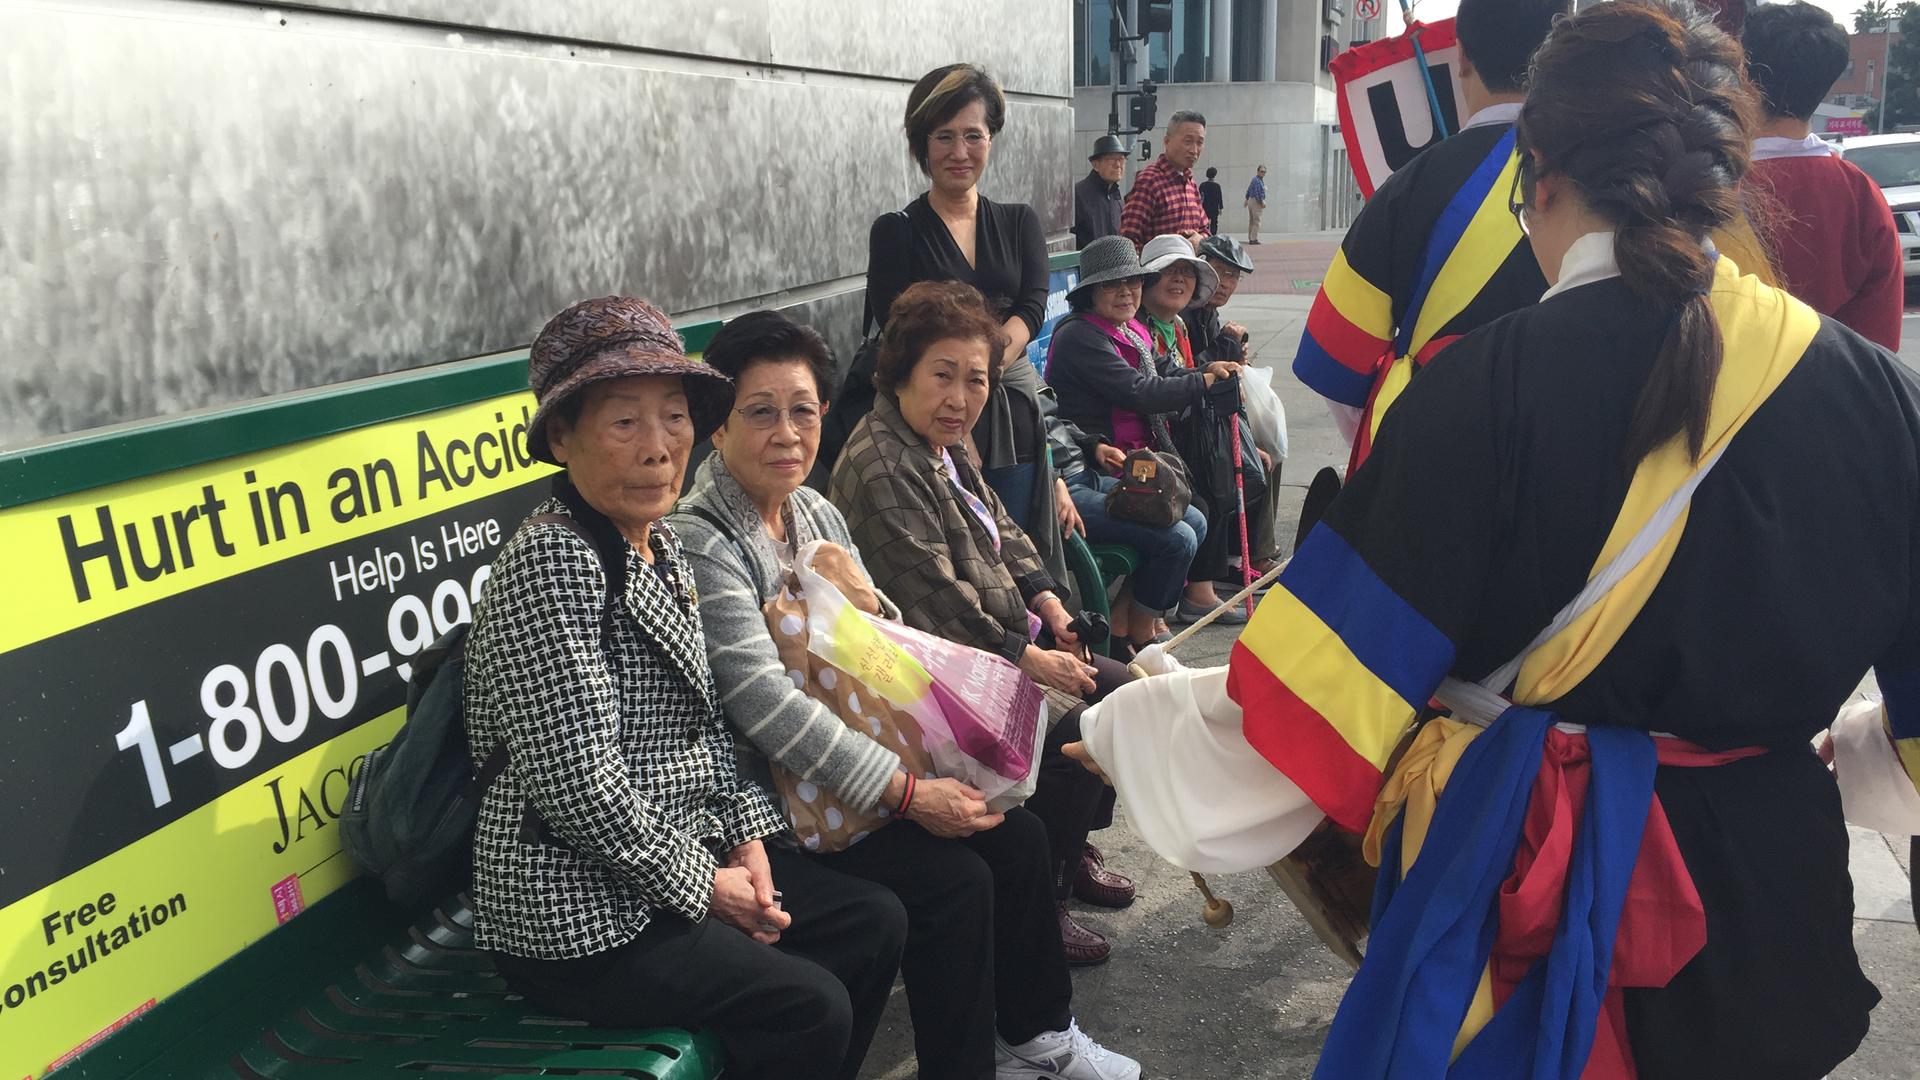 Korean grandmas get a surprise drum line performance while waiting for the bus in LA's Koreatown. The drumming celebration is now popular in Los Angeles, but it wasn't so much when it first started there in the late 1980s.